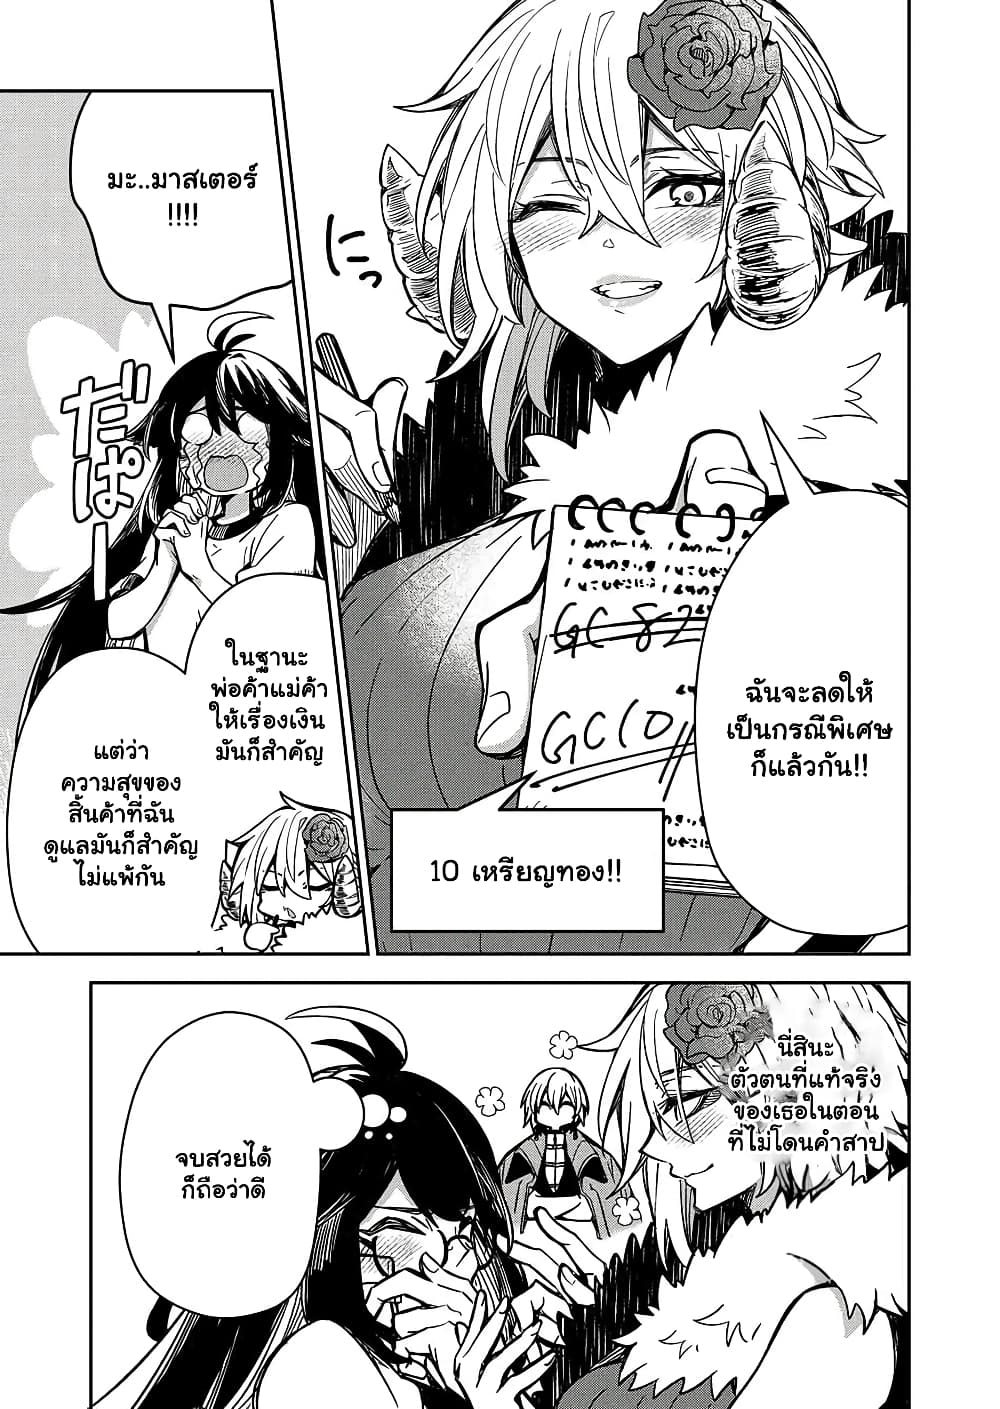 The Return of the Retired Demon Lord ตอนที่ 5.2 (7)